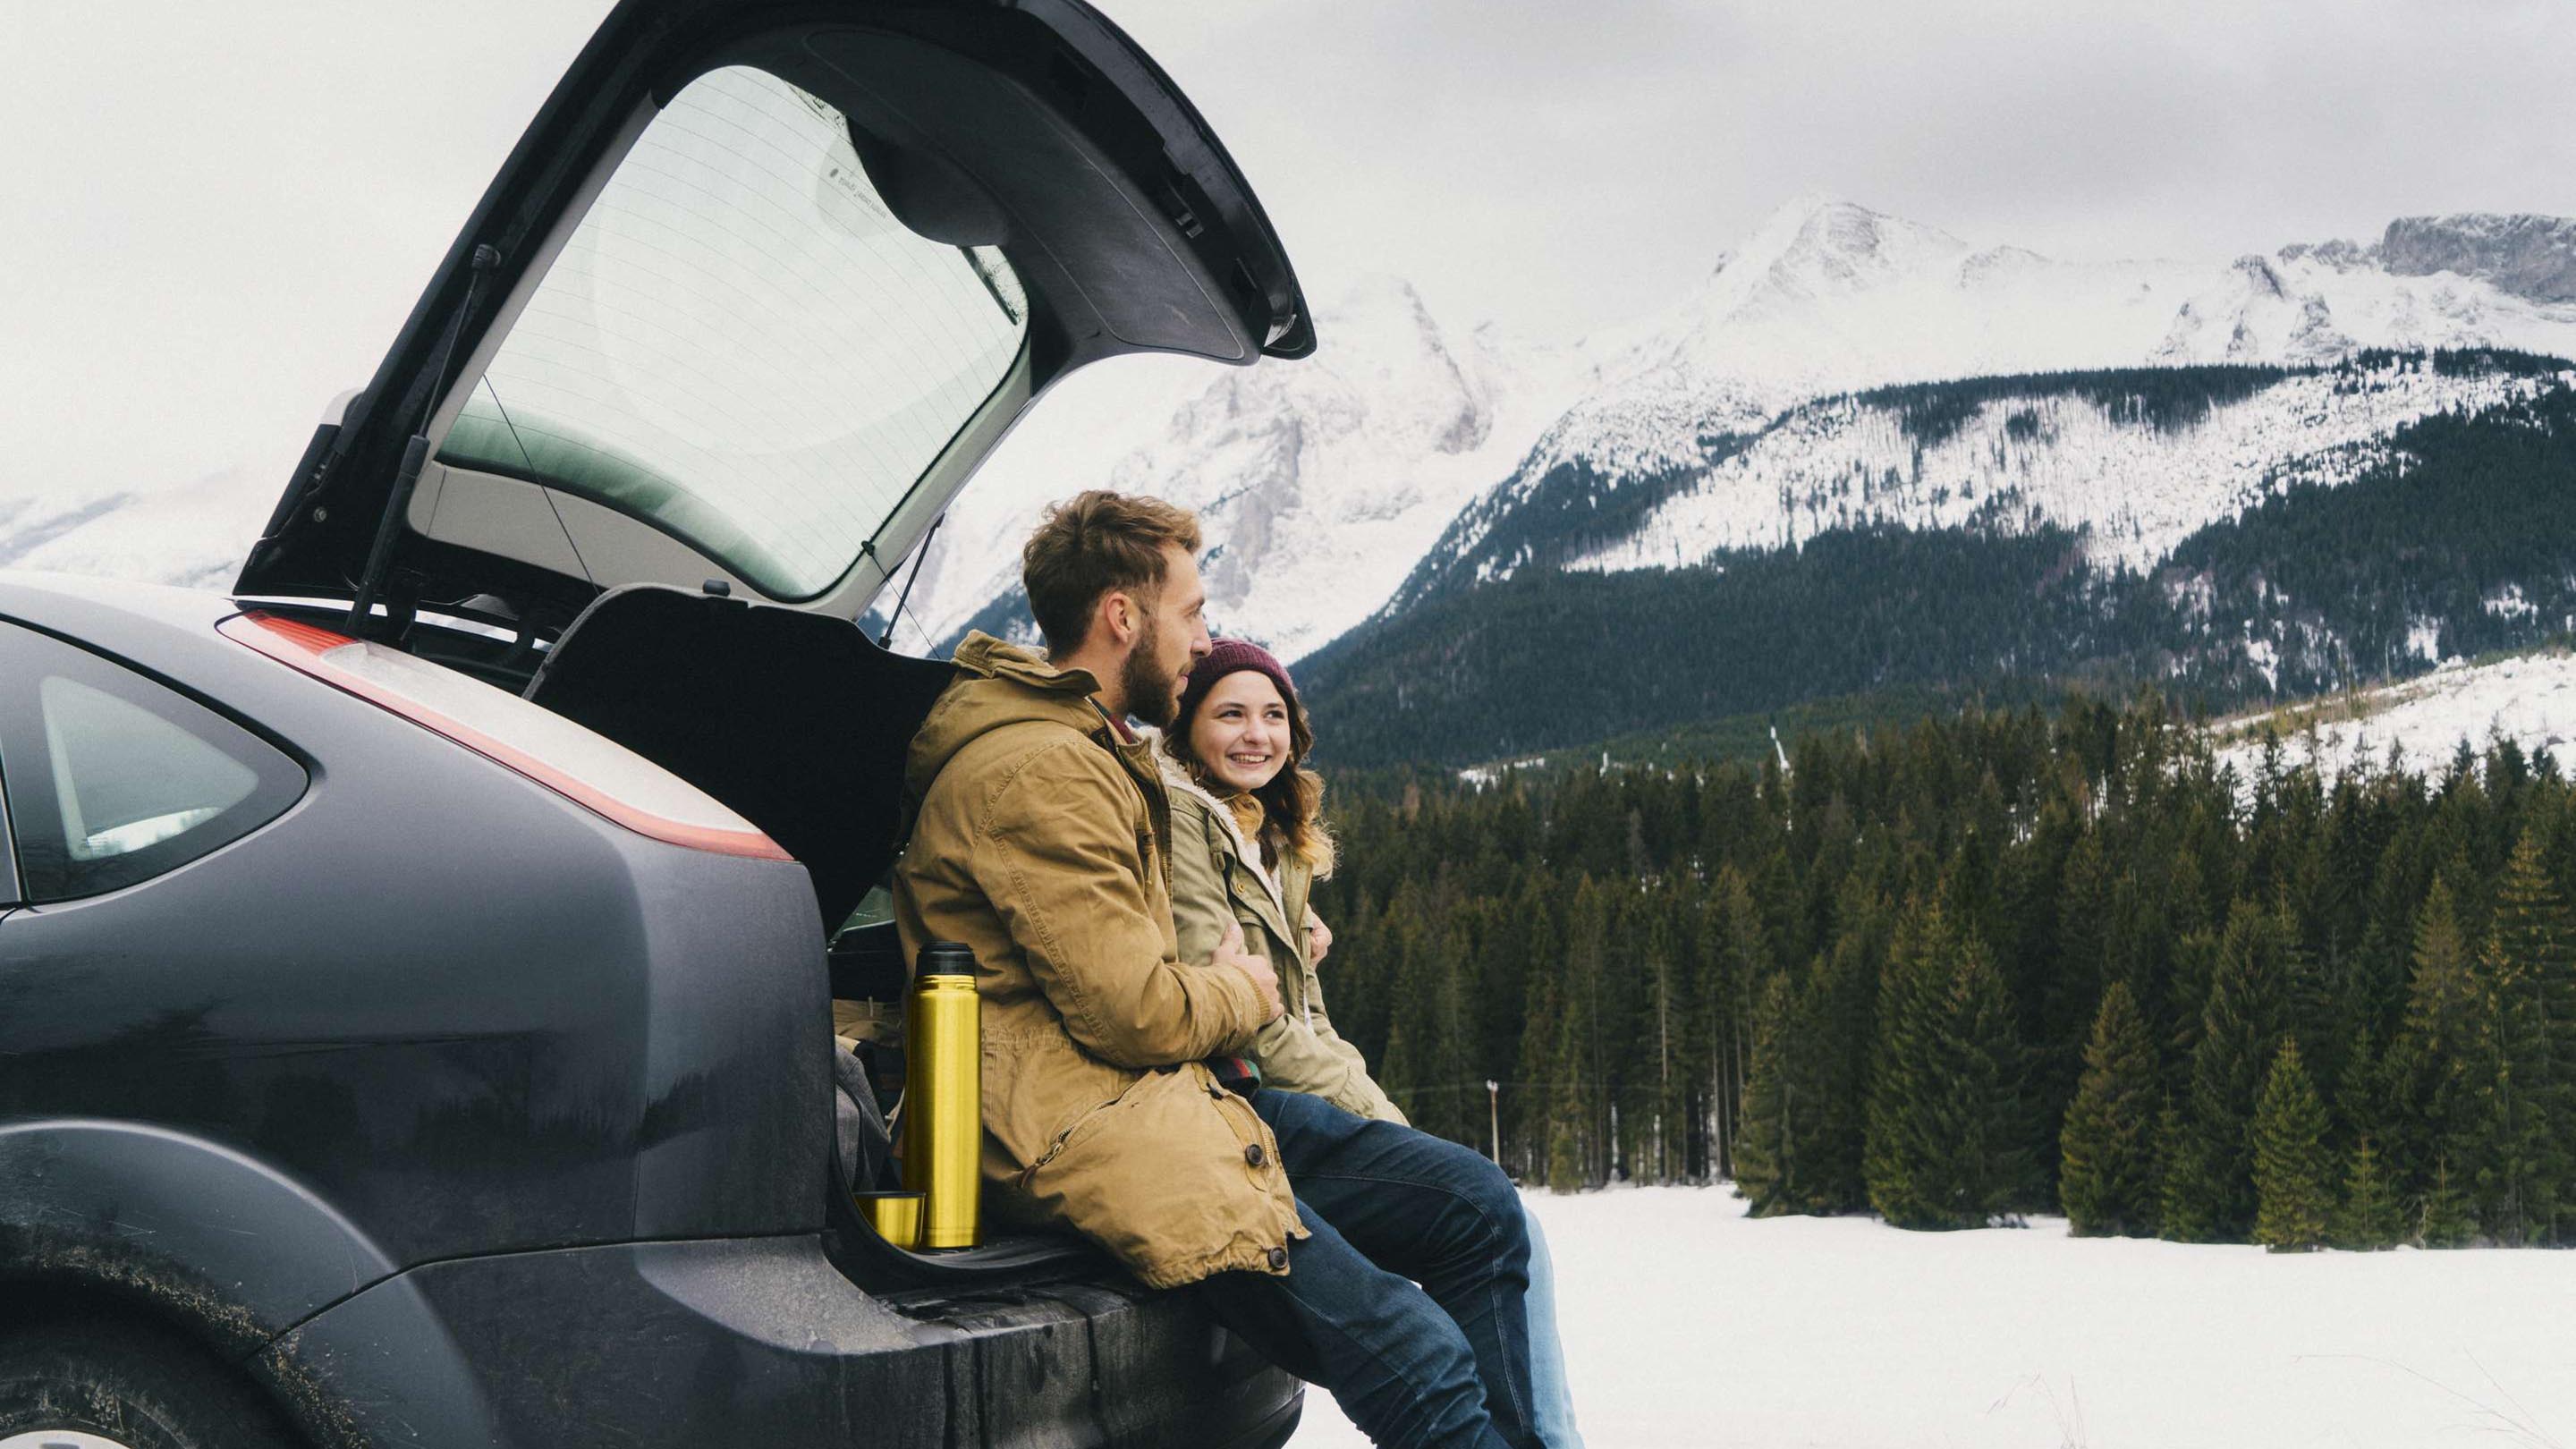 Man and woman sitting in car boot on snowy mountain